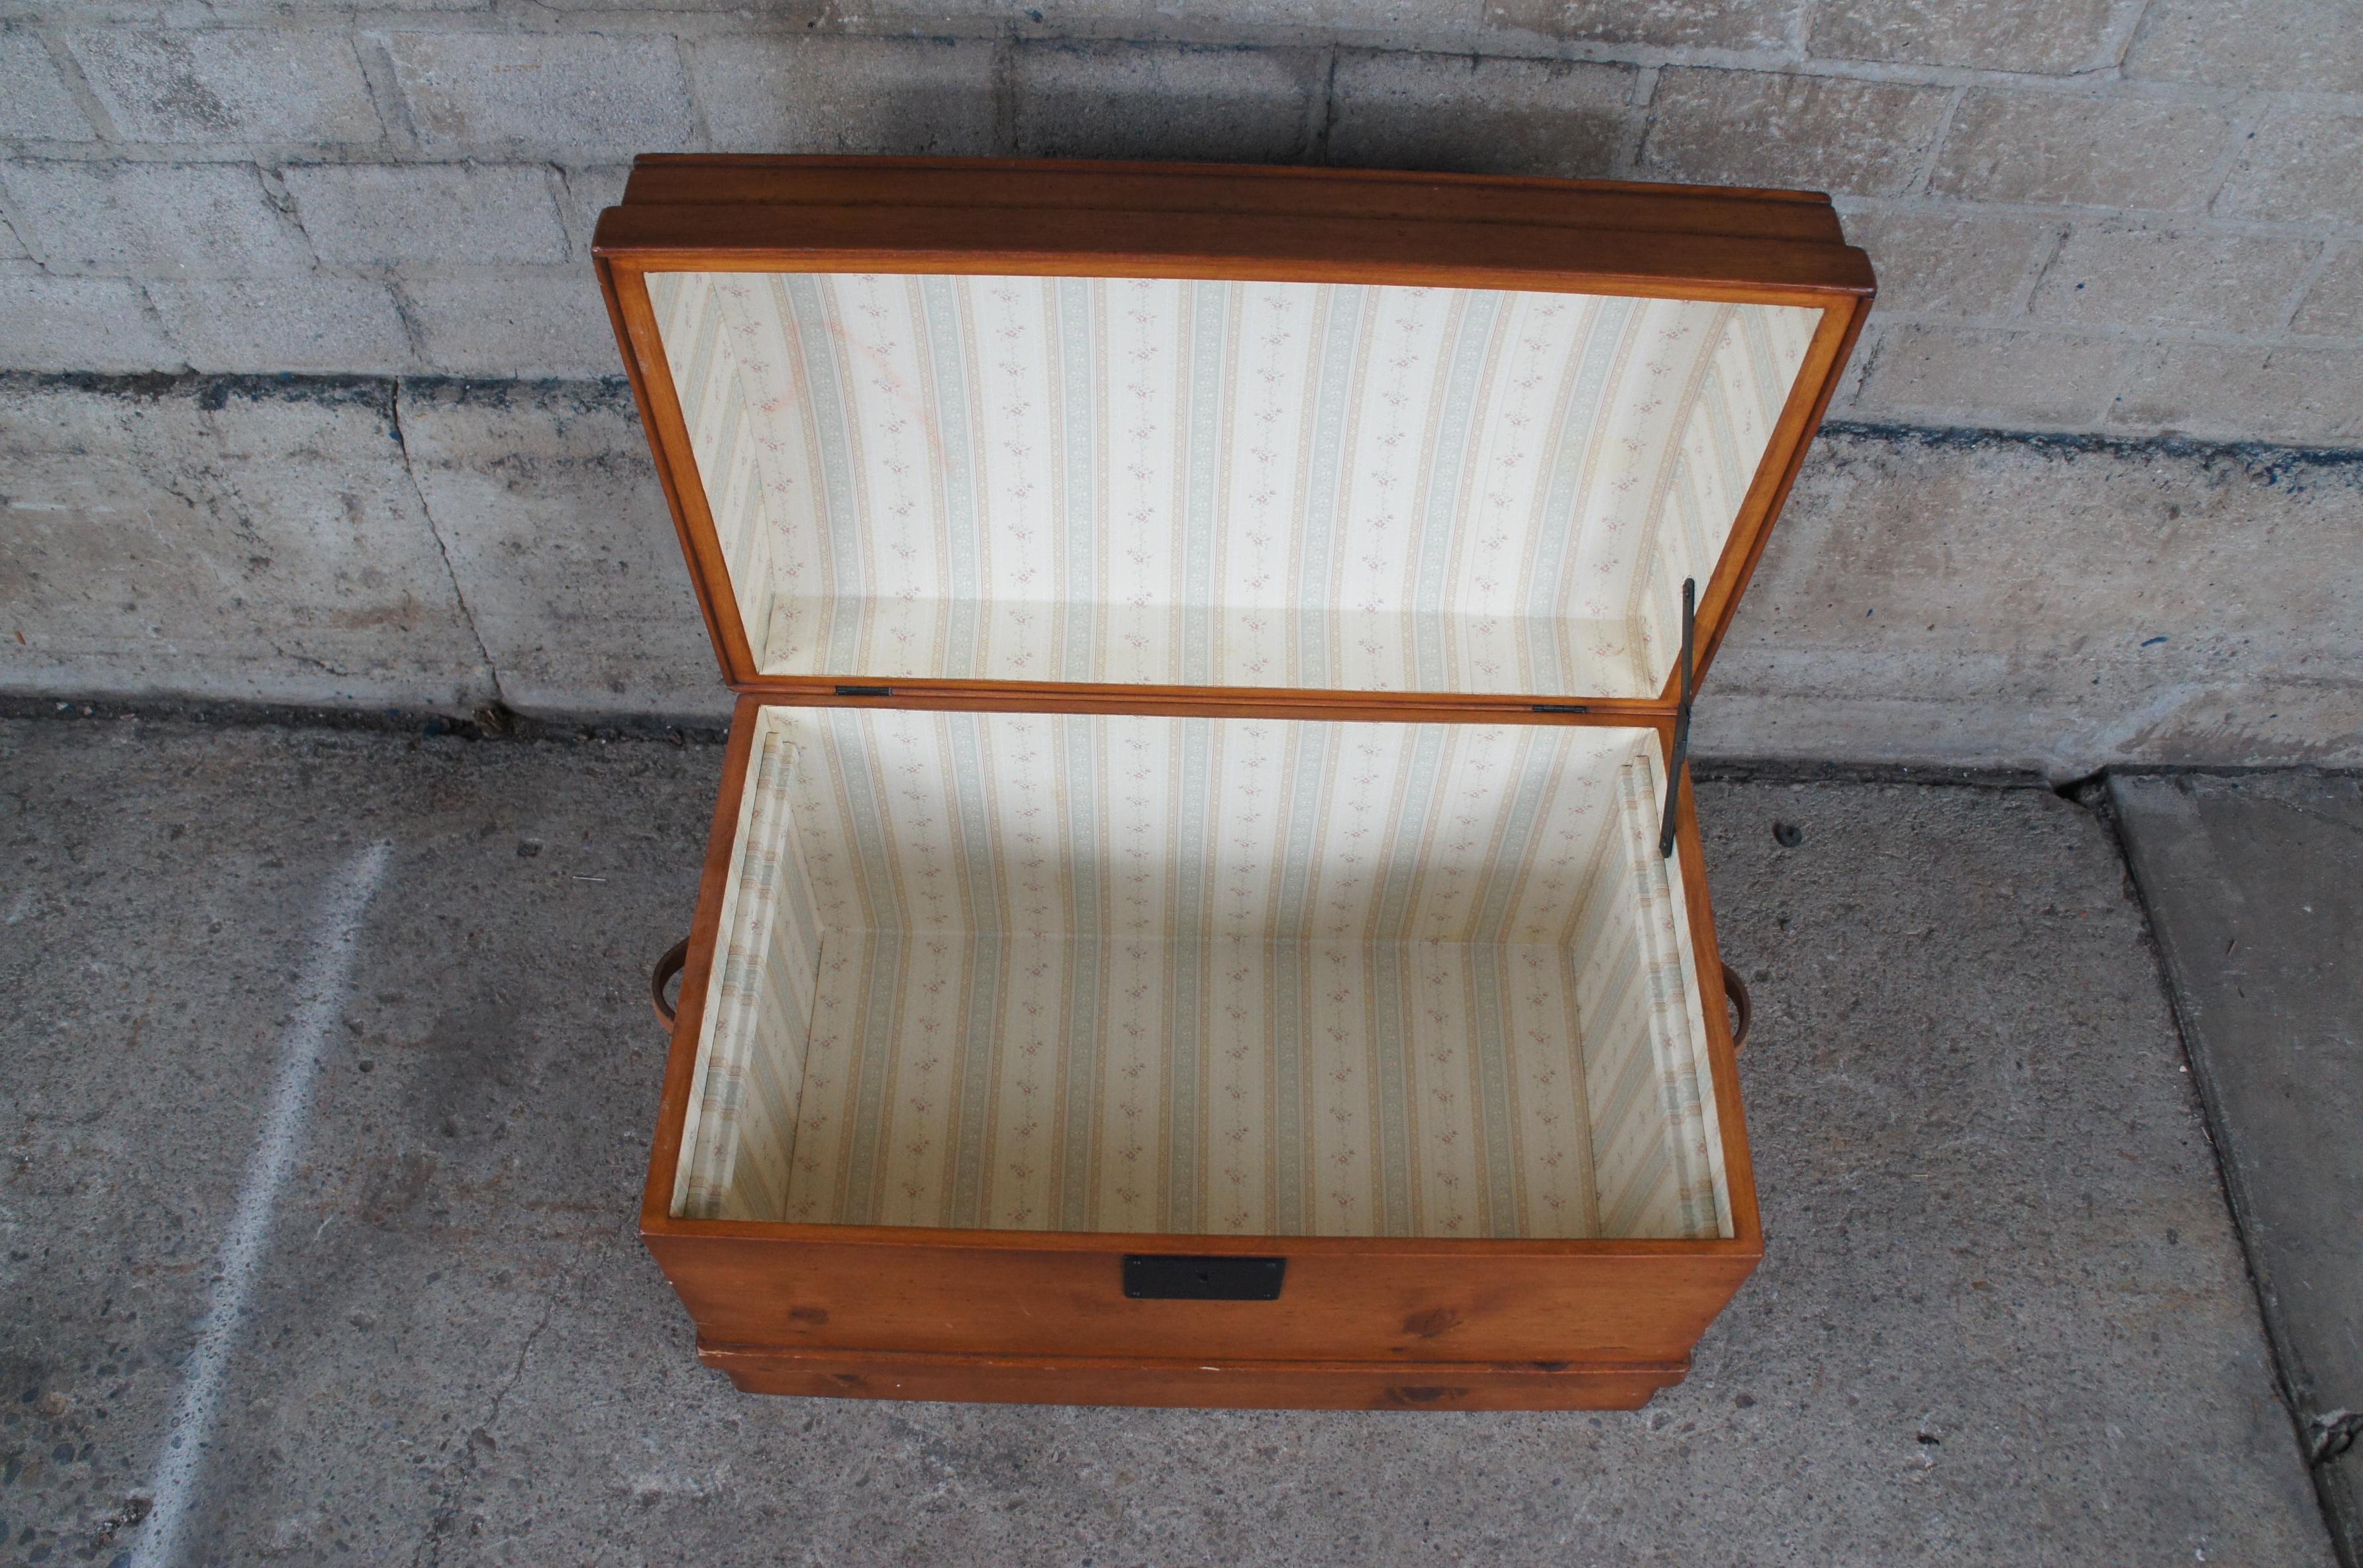 Victorian Style Vintage Pine Dome Top Steamer Trunk Treasure Hope Blanket Chest In Good Condition For Sale In Dayton, OH